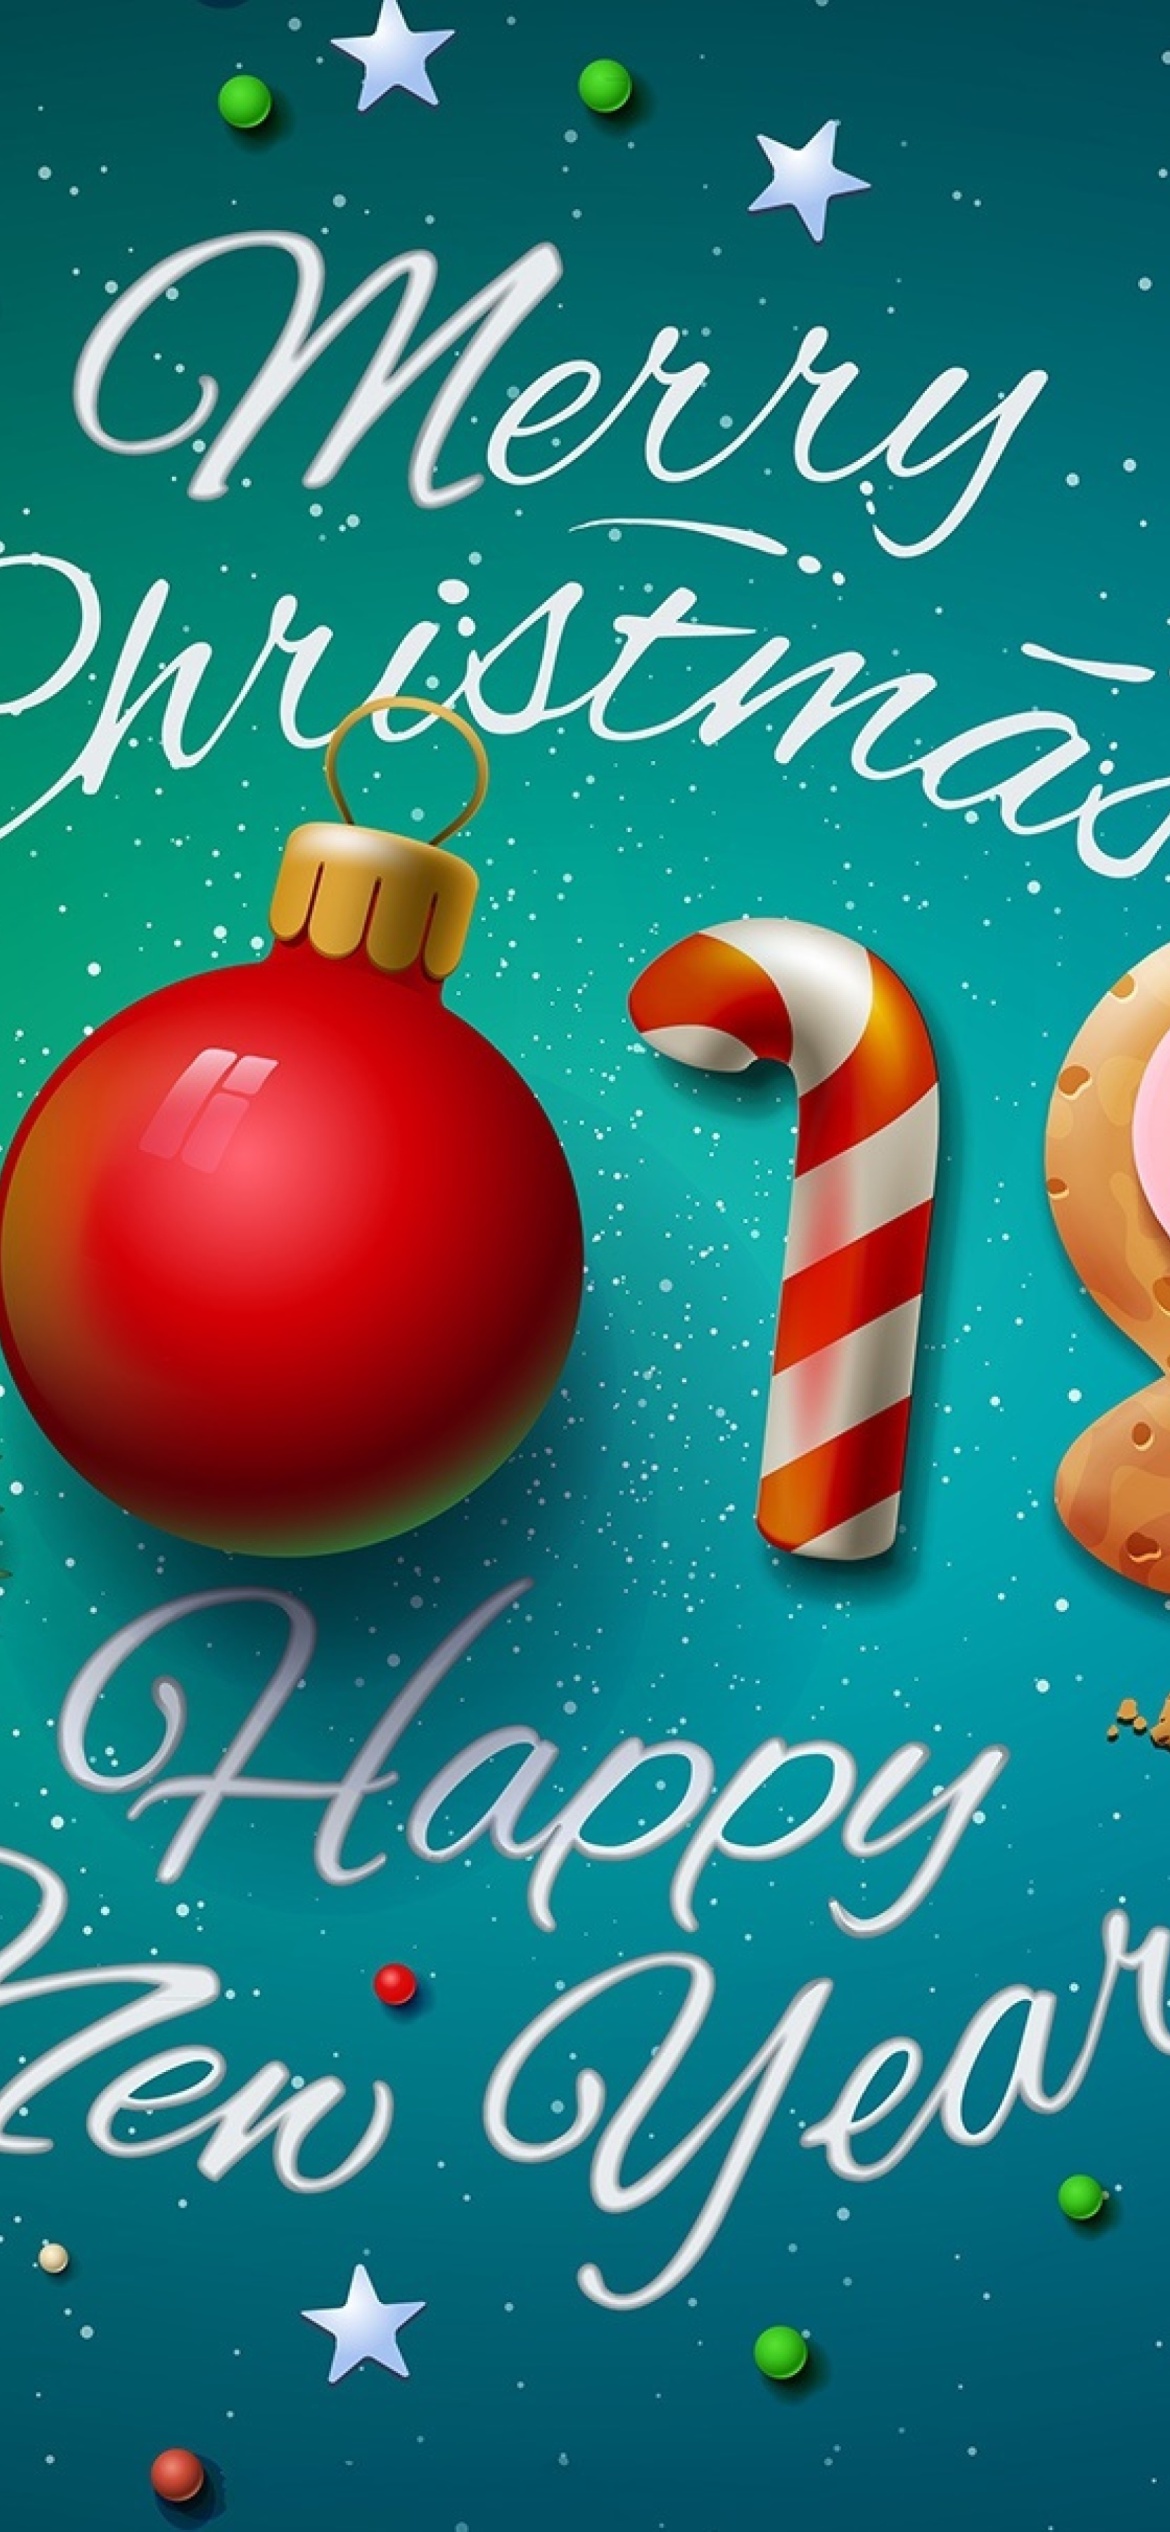 Das Merry Christmas and Happy New Year 2019 Wallpaper 1170x2532